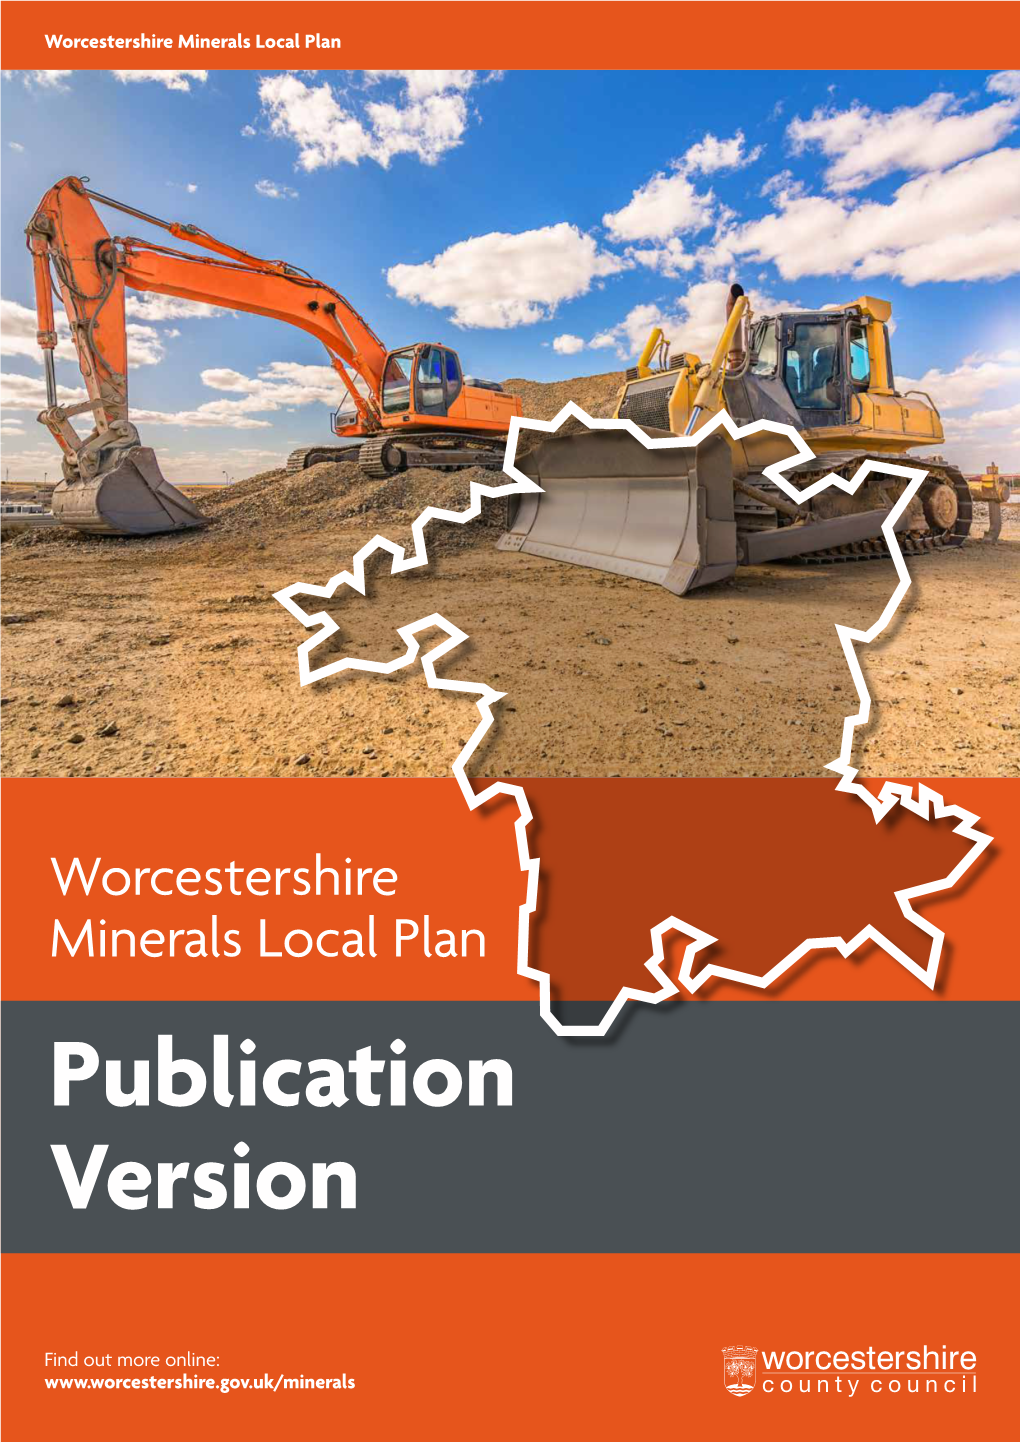 Publication Version of the Minerals Local Plan